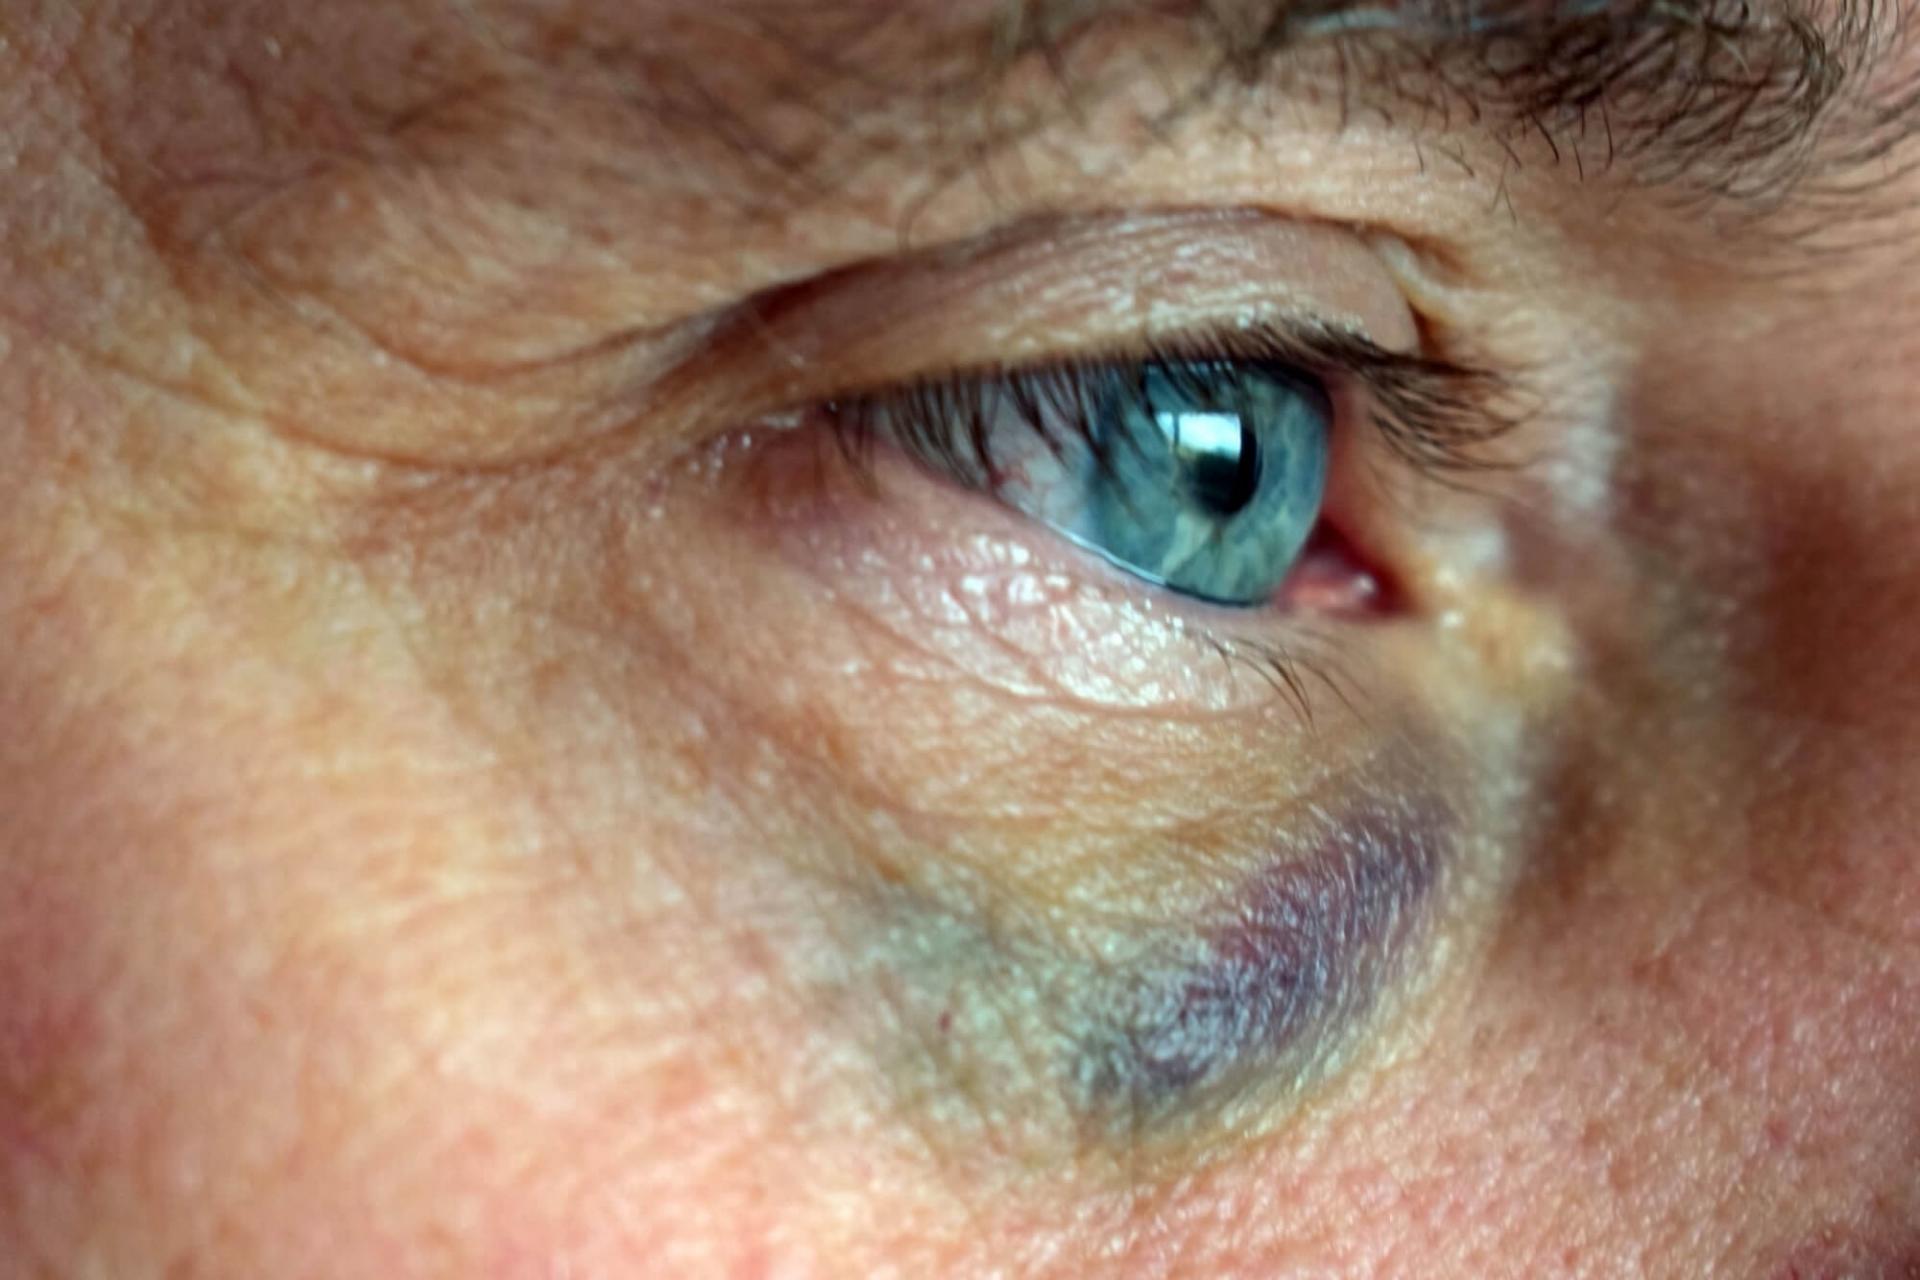 Blunt trauma can cause blood vessels in the eye to burst, and the white part of the eye (conjunctiva/sclera) will look red and bloodshot.